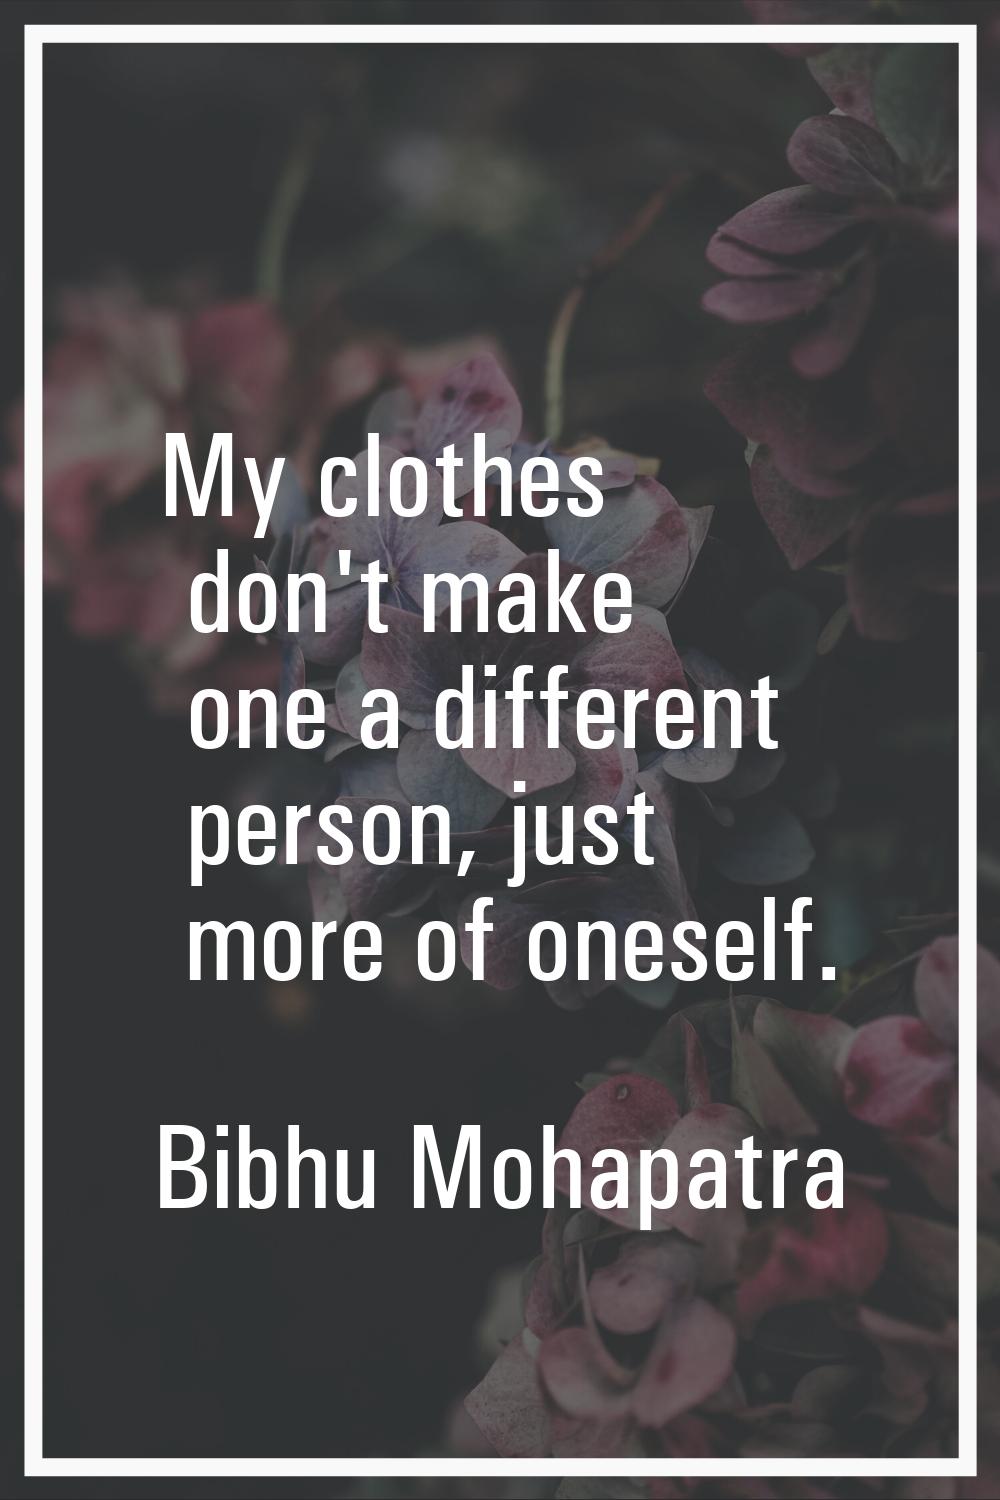 My clothes don't make one a different person, just more of oneself.